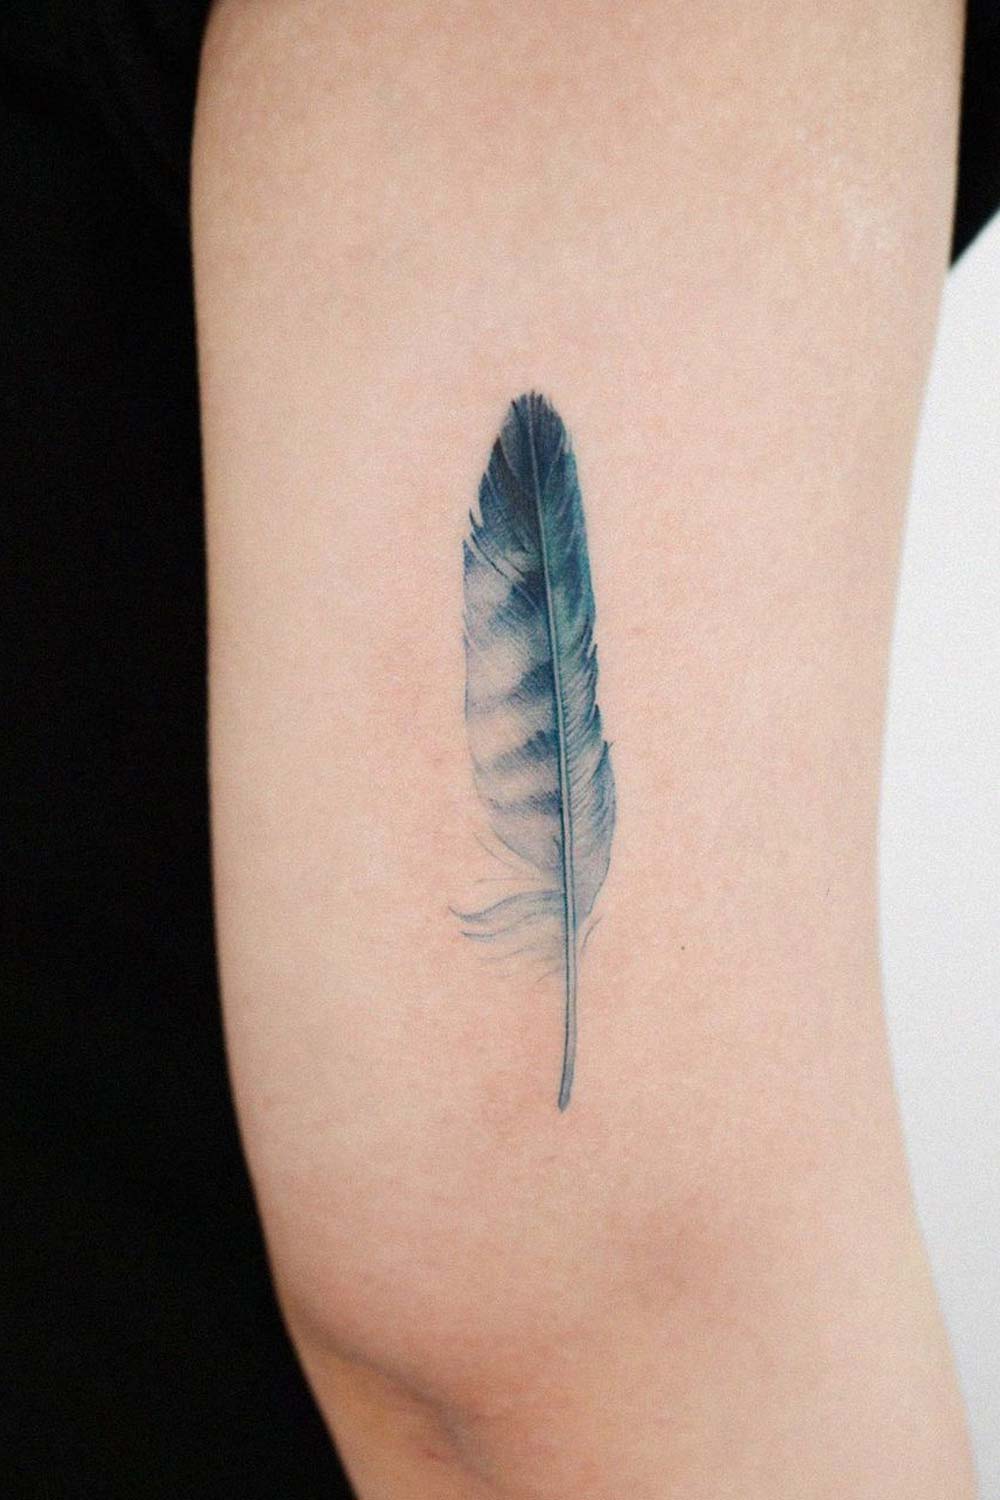 Pin by Debra Criswell on Tattos | Feather tattoo design, Feather tattoos,  Feather drawing